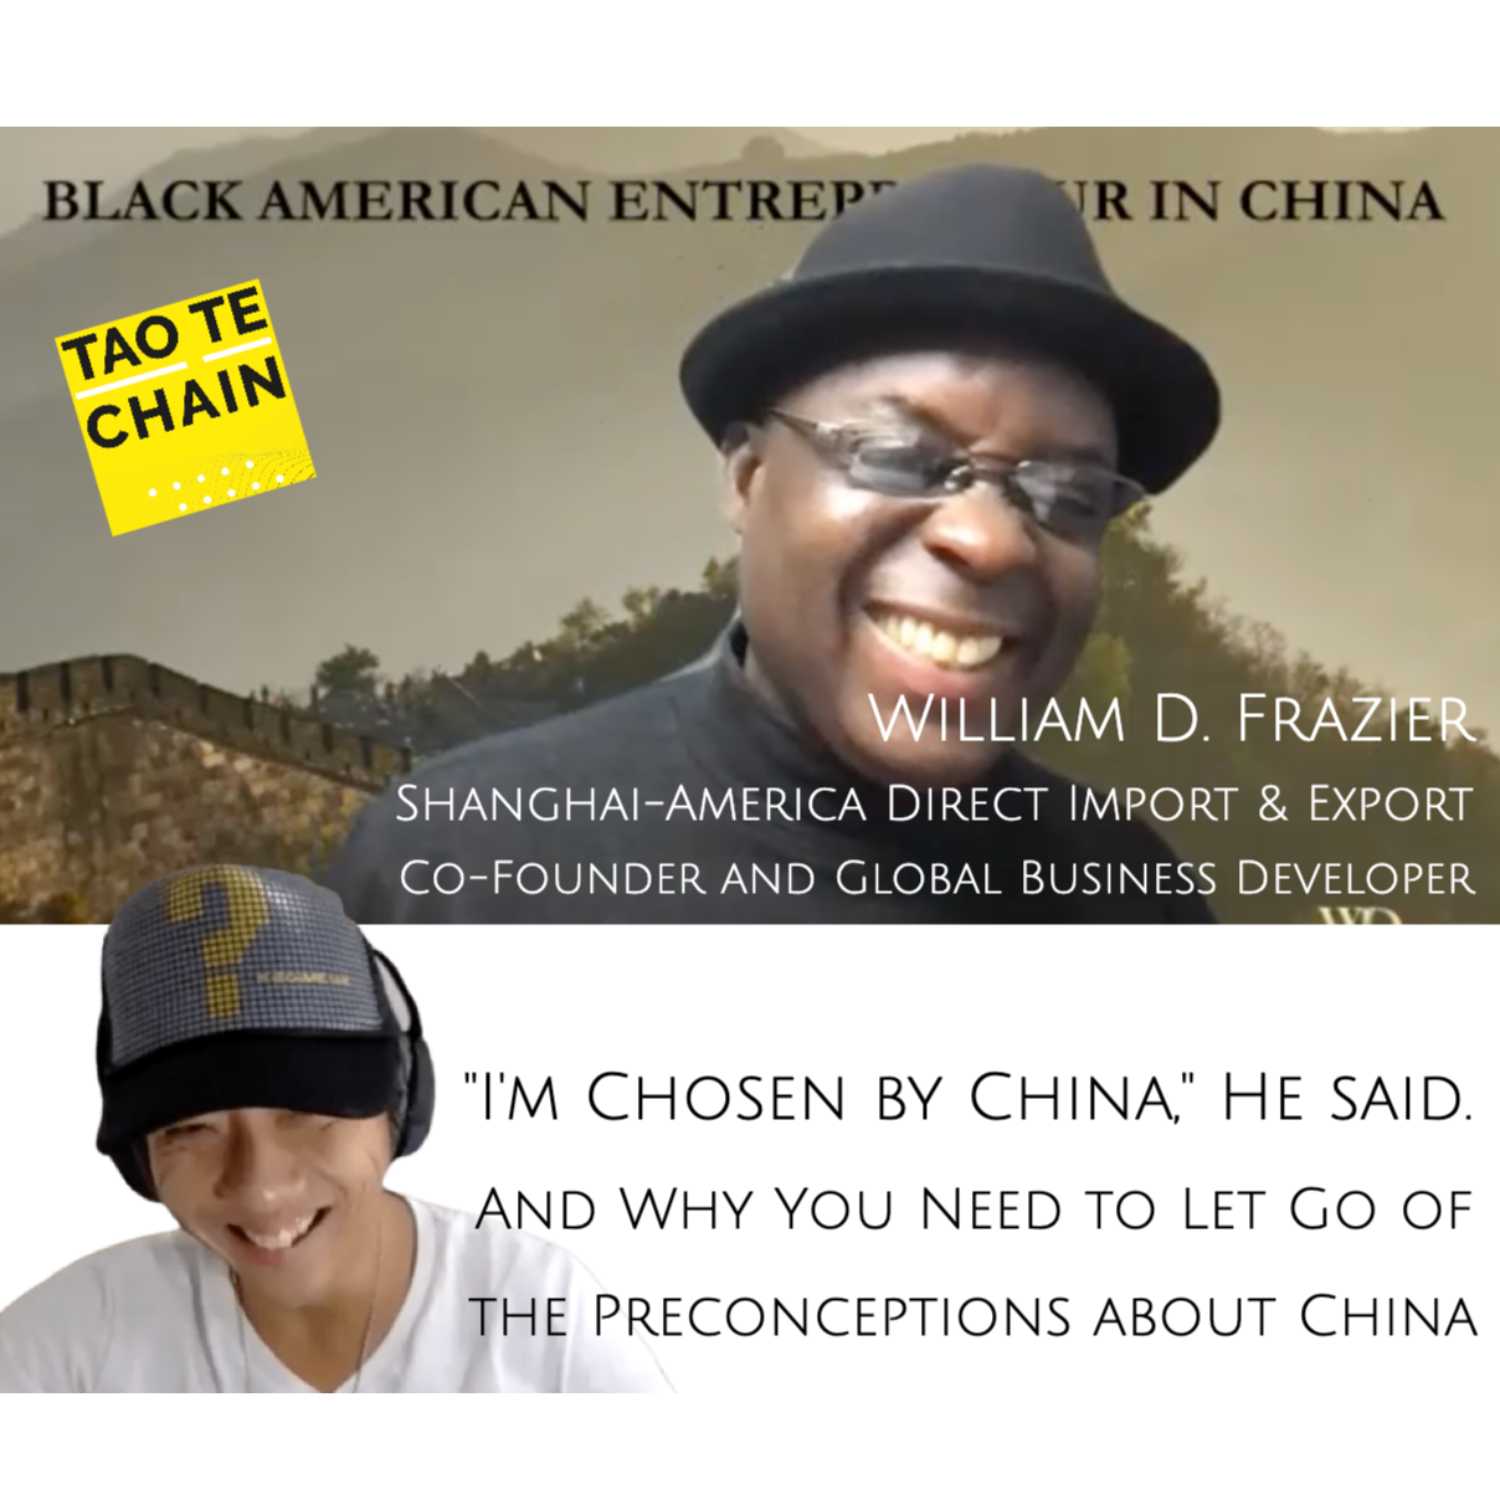 William D. Frazier - "I'm Chosen by China," He said. And Why You Need to Let Go of the Preconceptions about China.